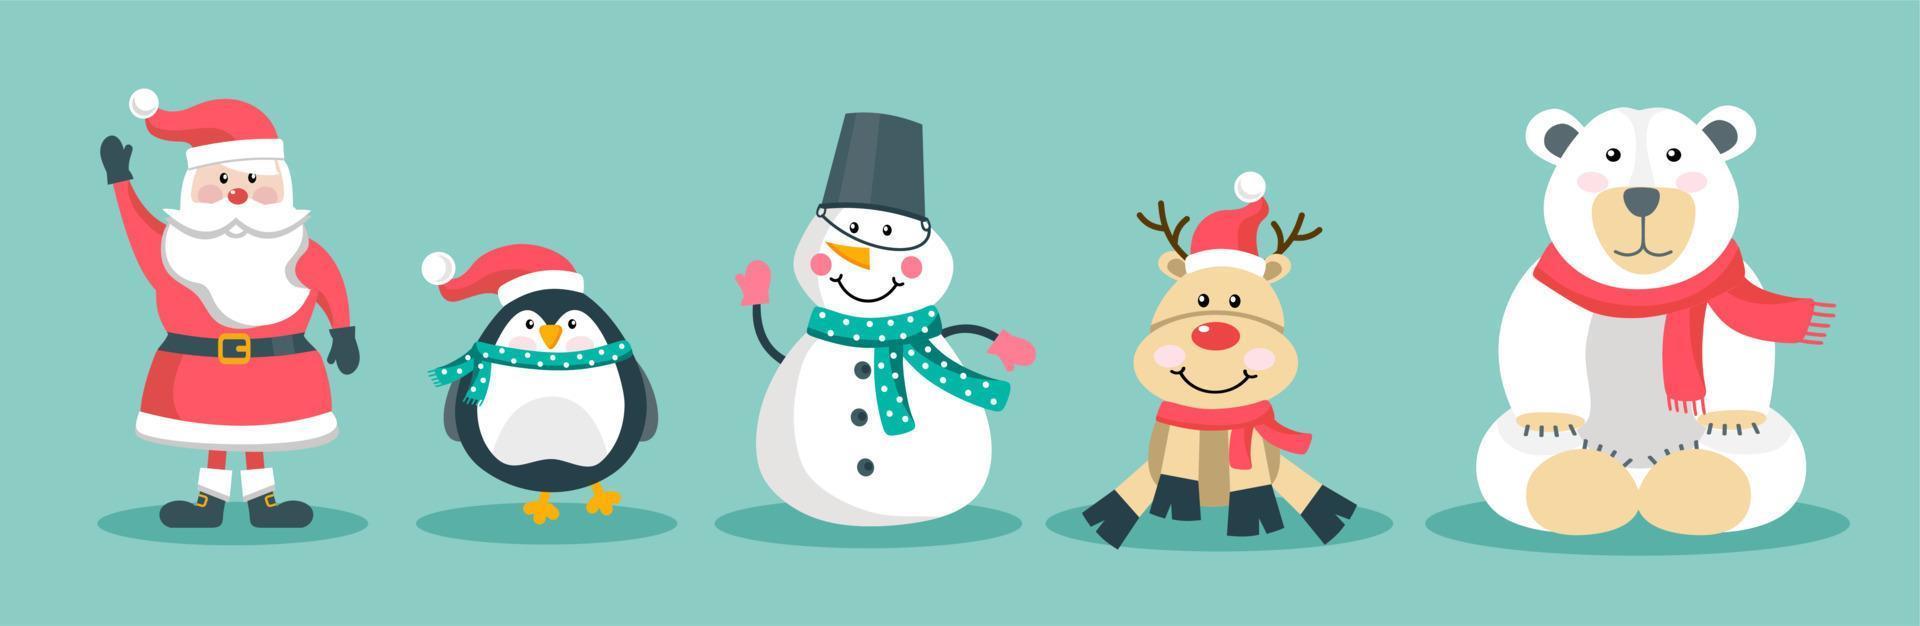 Funny Christmas characters set of Santa, snowman, deer, penguin, bear, in a hat and scarf. Vector illustration in a flat style. The concept of Christmas and New Year.